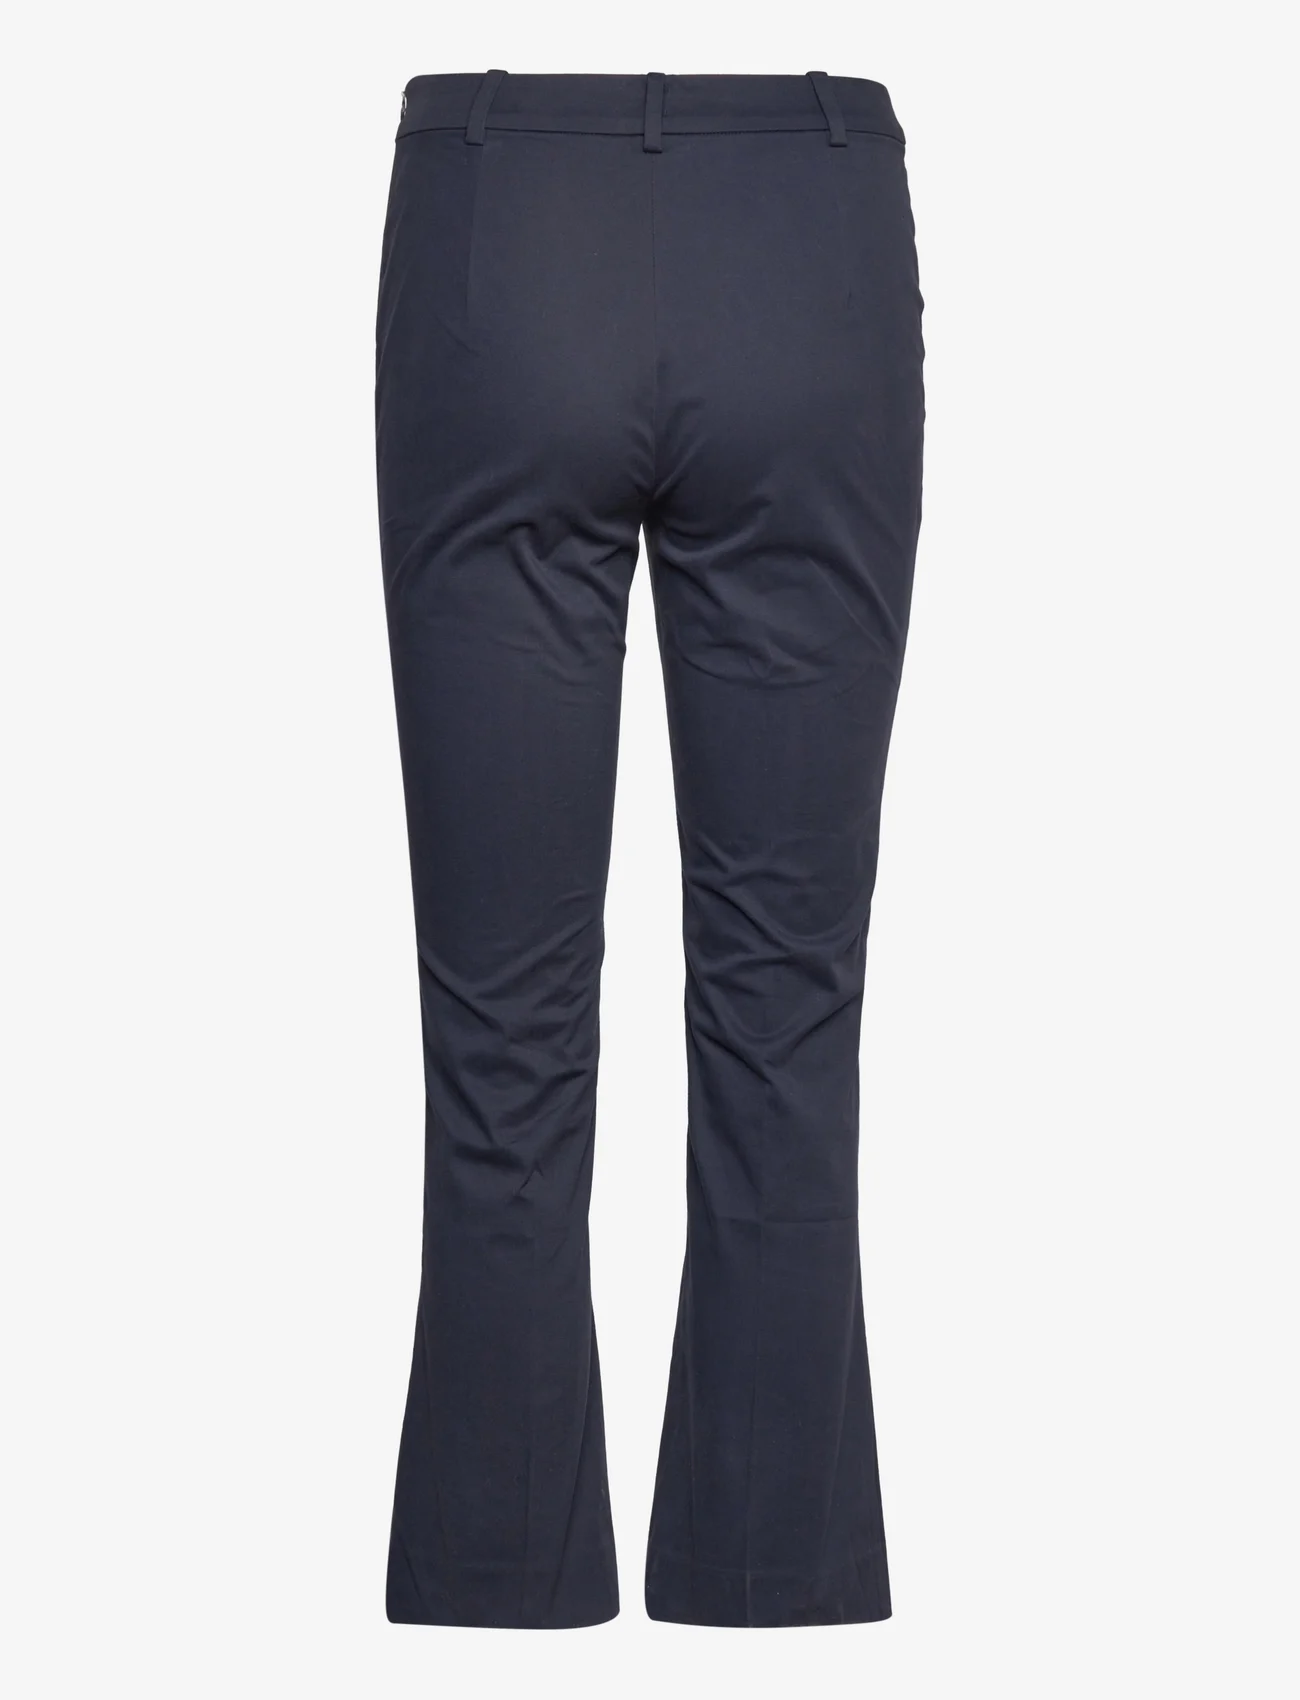 Marville Road - Emily Kick Flare Chinos - dames - midnight blue - 1